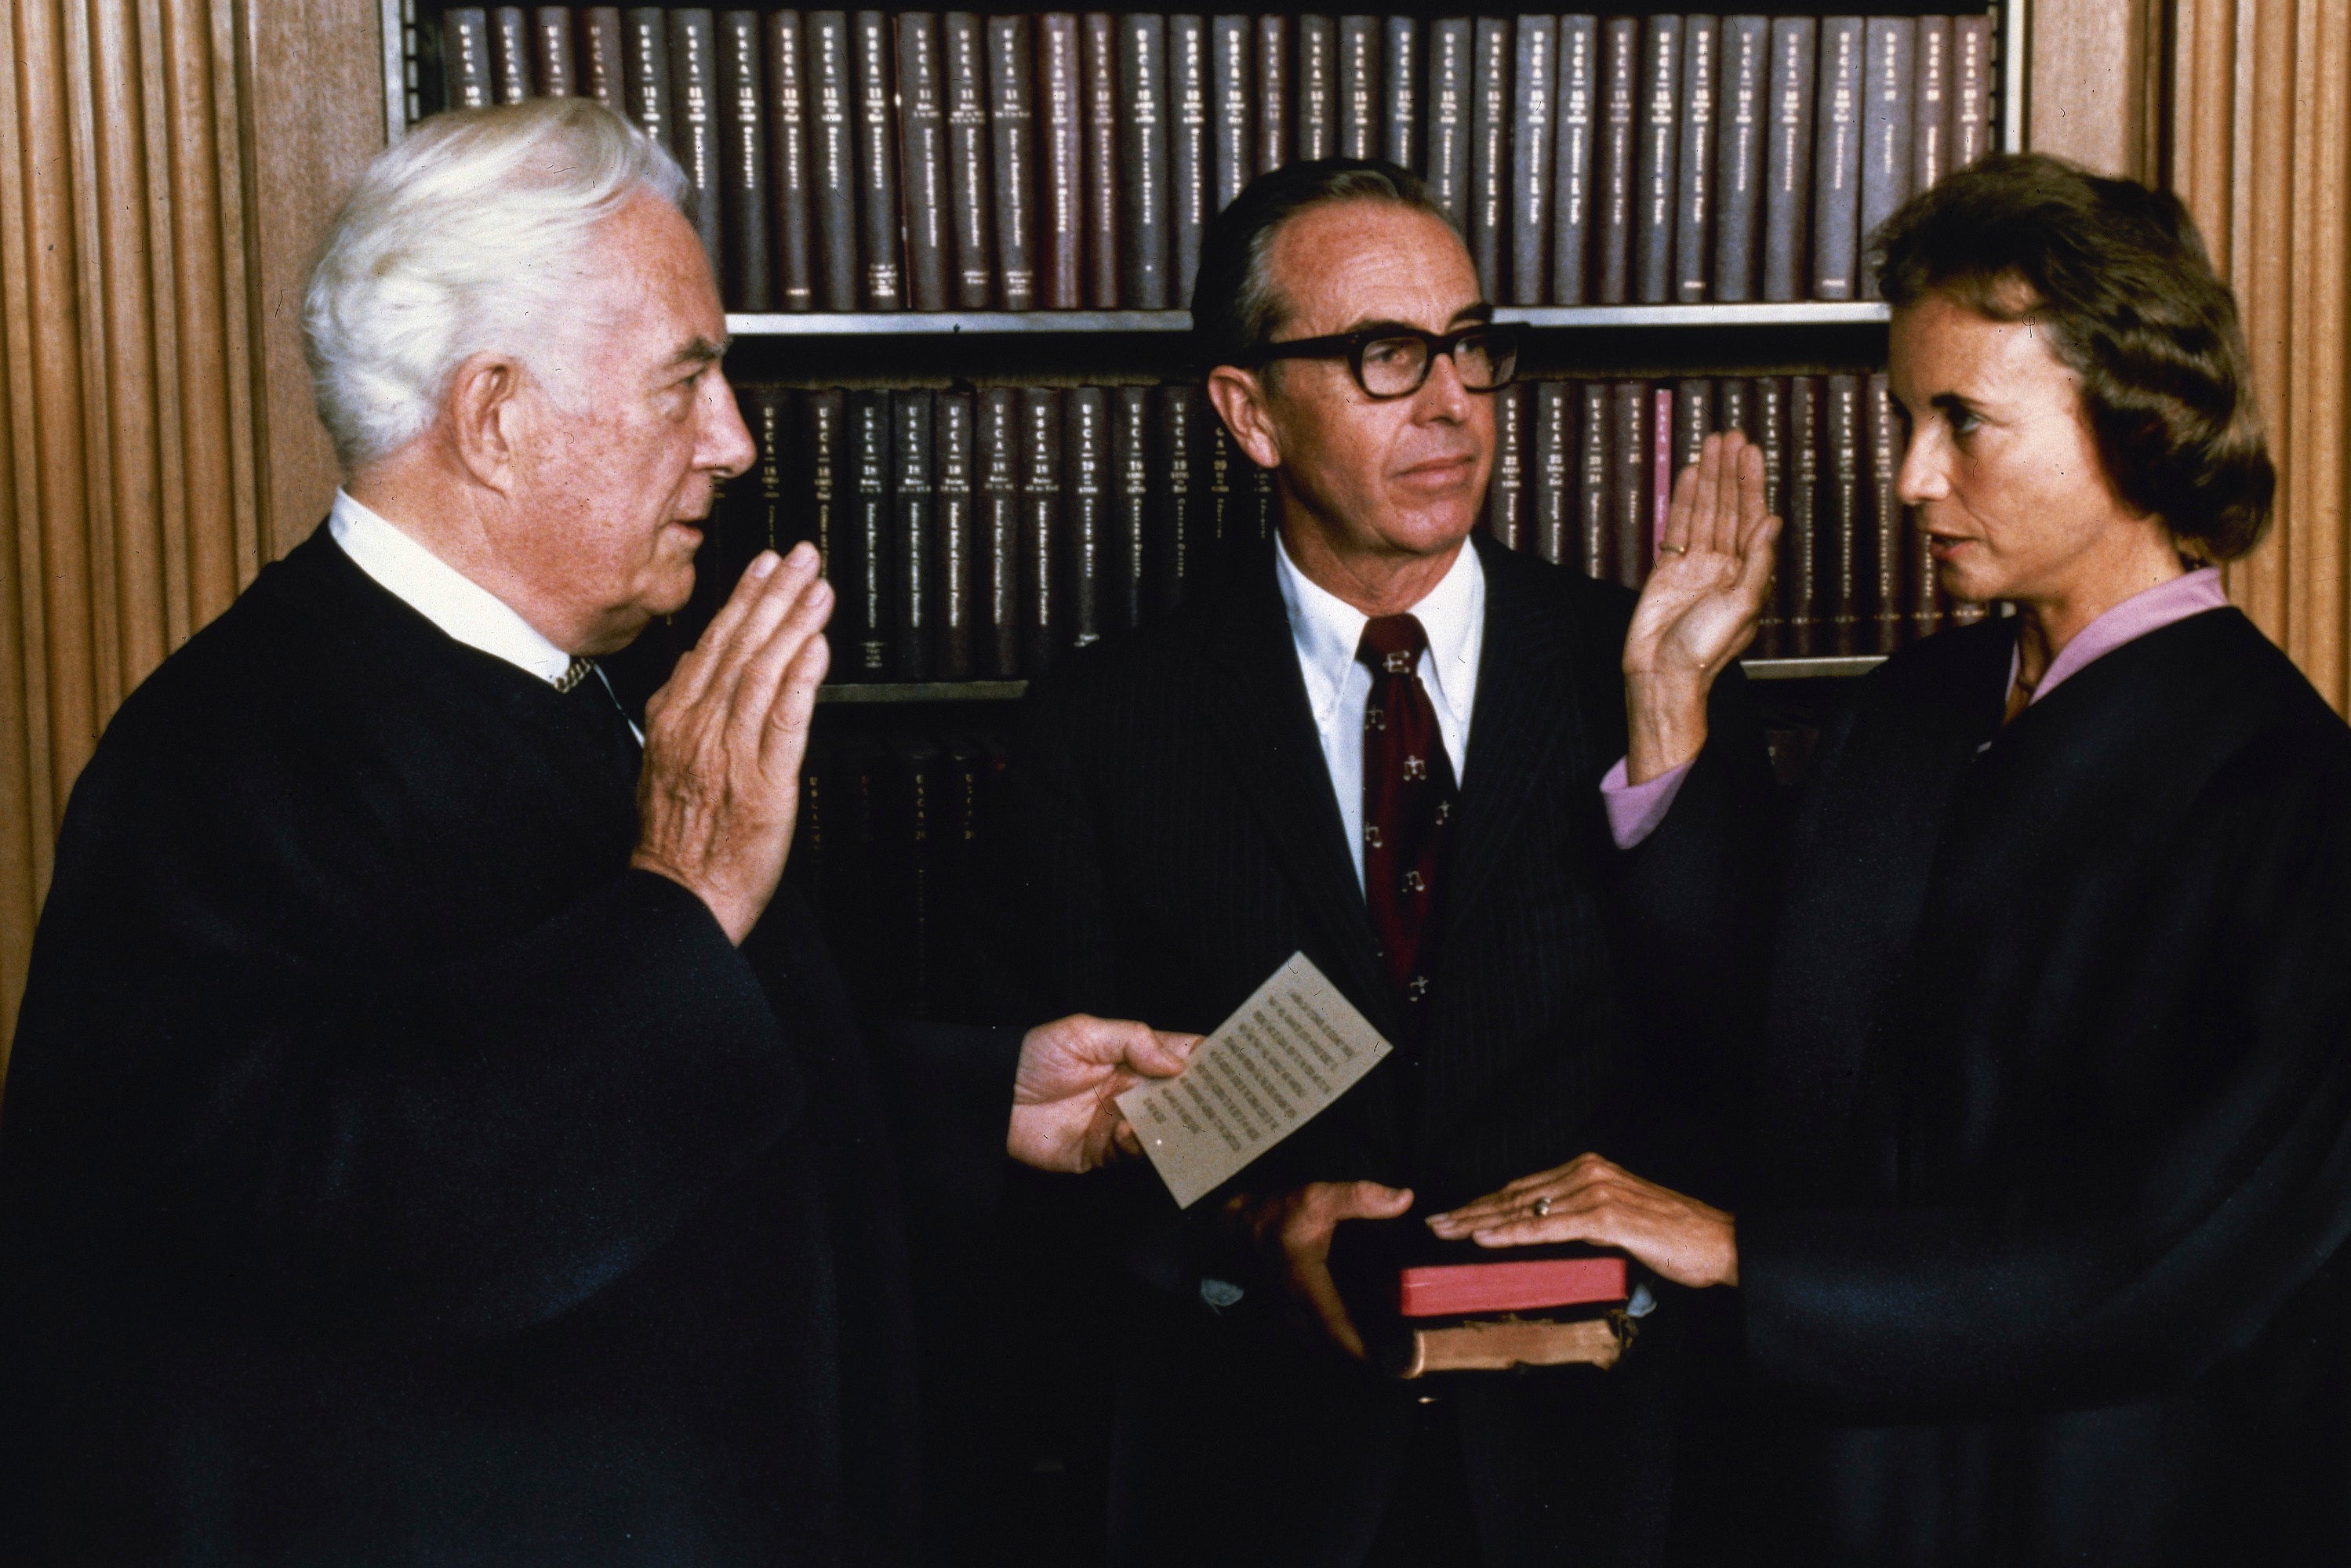 O'Connor is sworn in by Chief Justice Warren Burger in the court's conference room on 25 September 1981